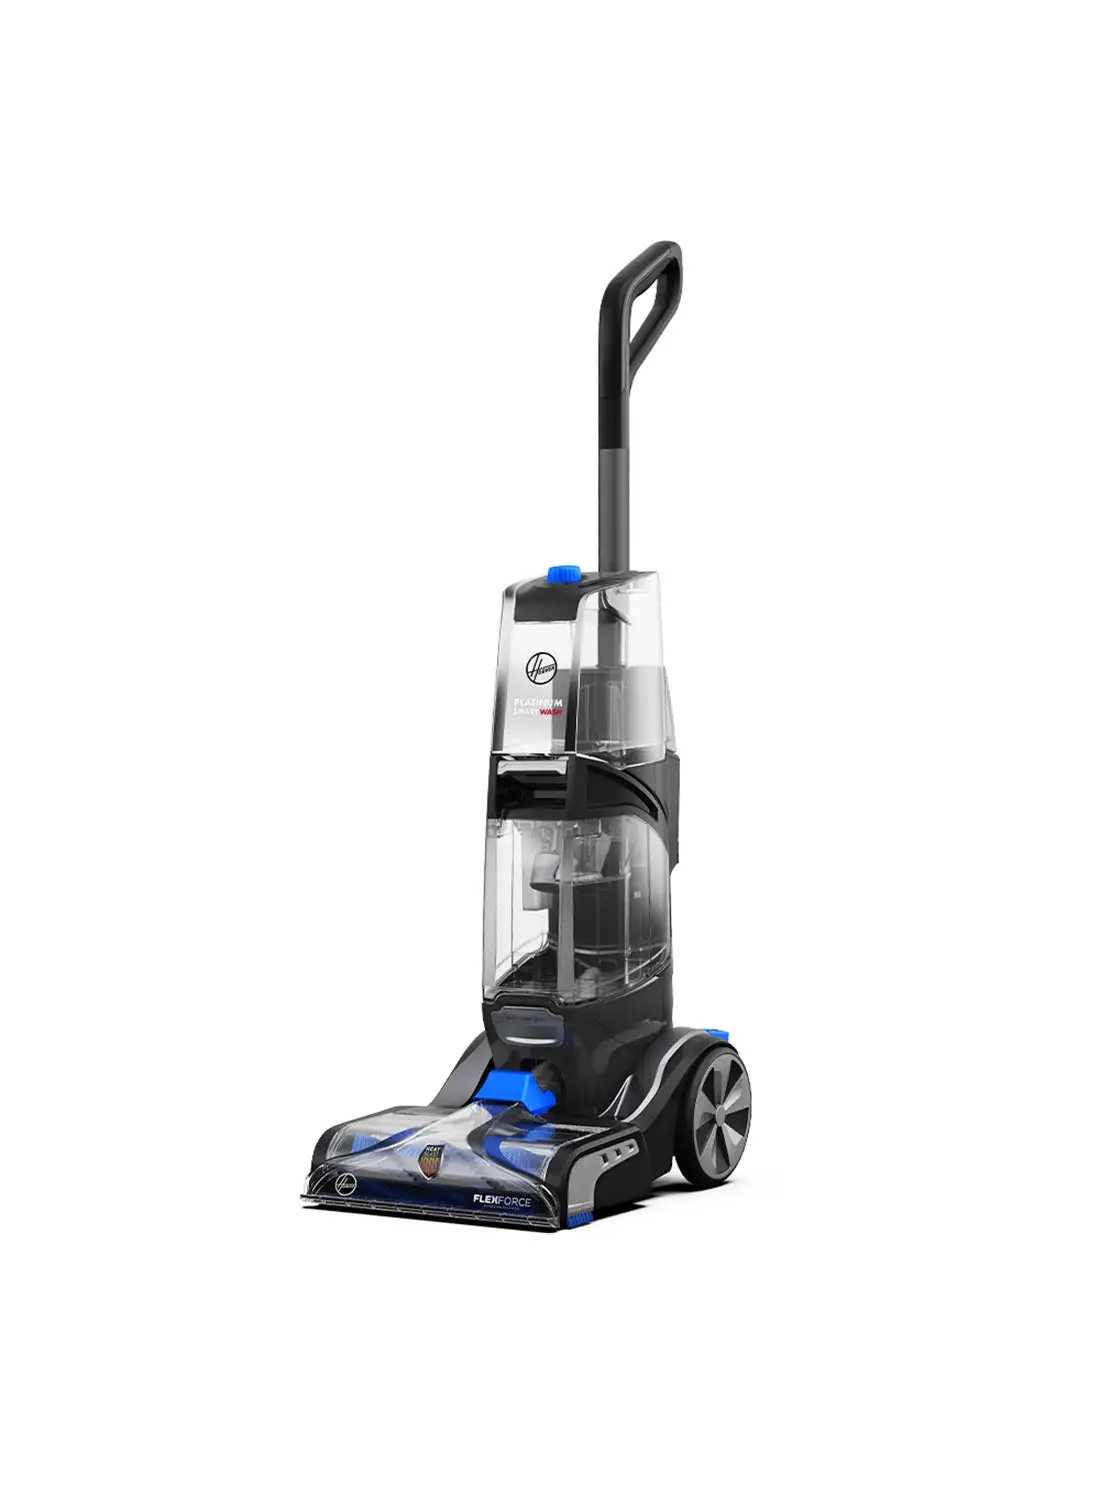 HOOVER Automatic Carpet Washer - Platinum Smart Wash Upright Vacuum Cleaner 3.5 L 1200 W CDCW-SWME Grey/Black